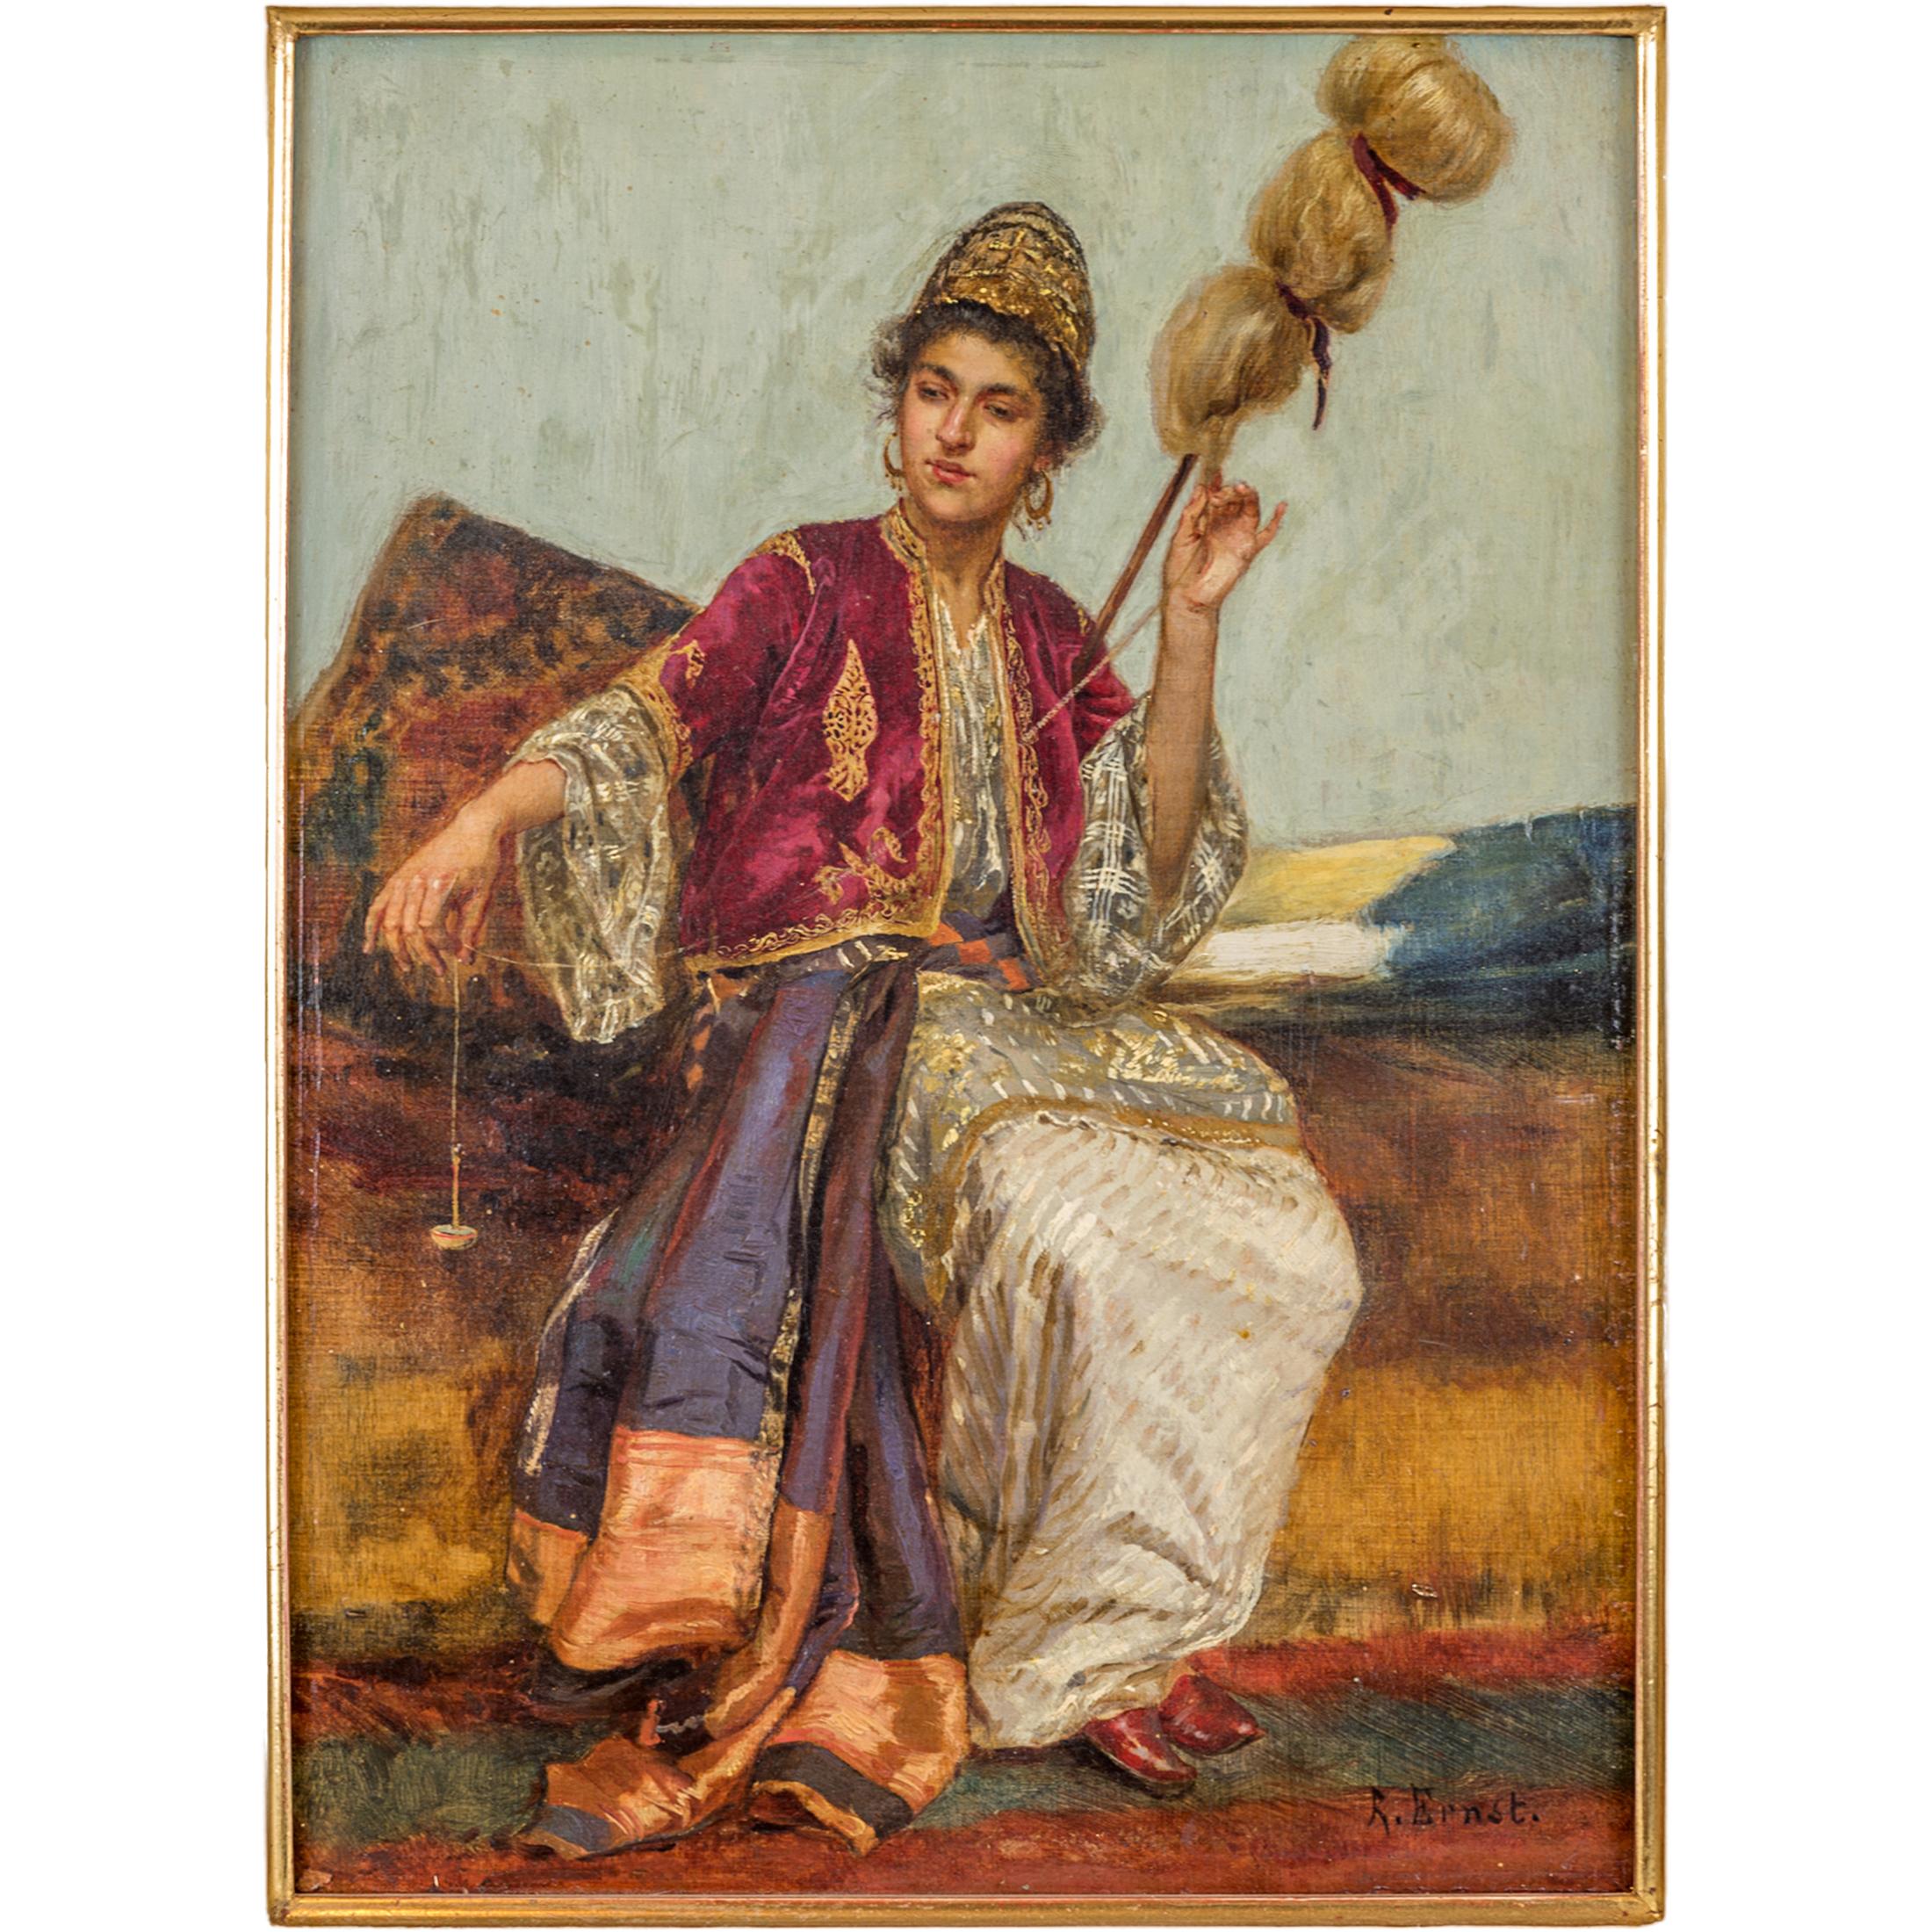 A Beautiful orientalist painting depicting a beautiful young woman with a spool spinner. 
Rudolf Ernst travelled to Spain, North Africa, Turkey and Egypt in the late nineteenth century and he became fascinated with Islamic culture and his paintings